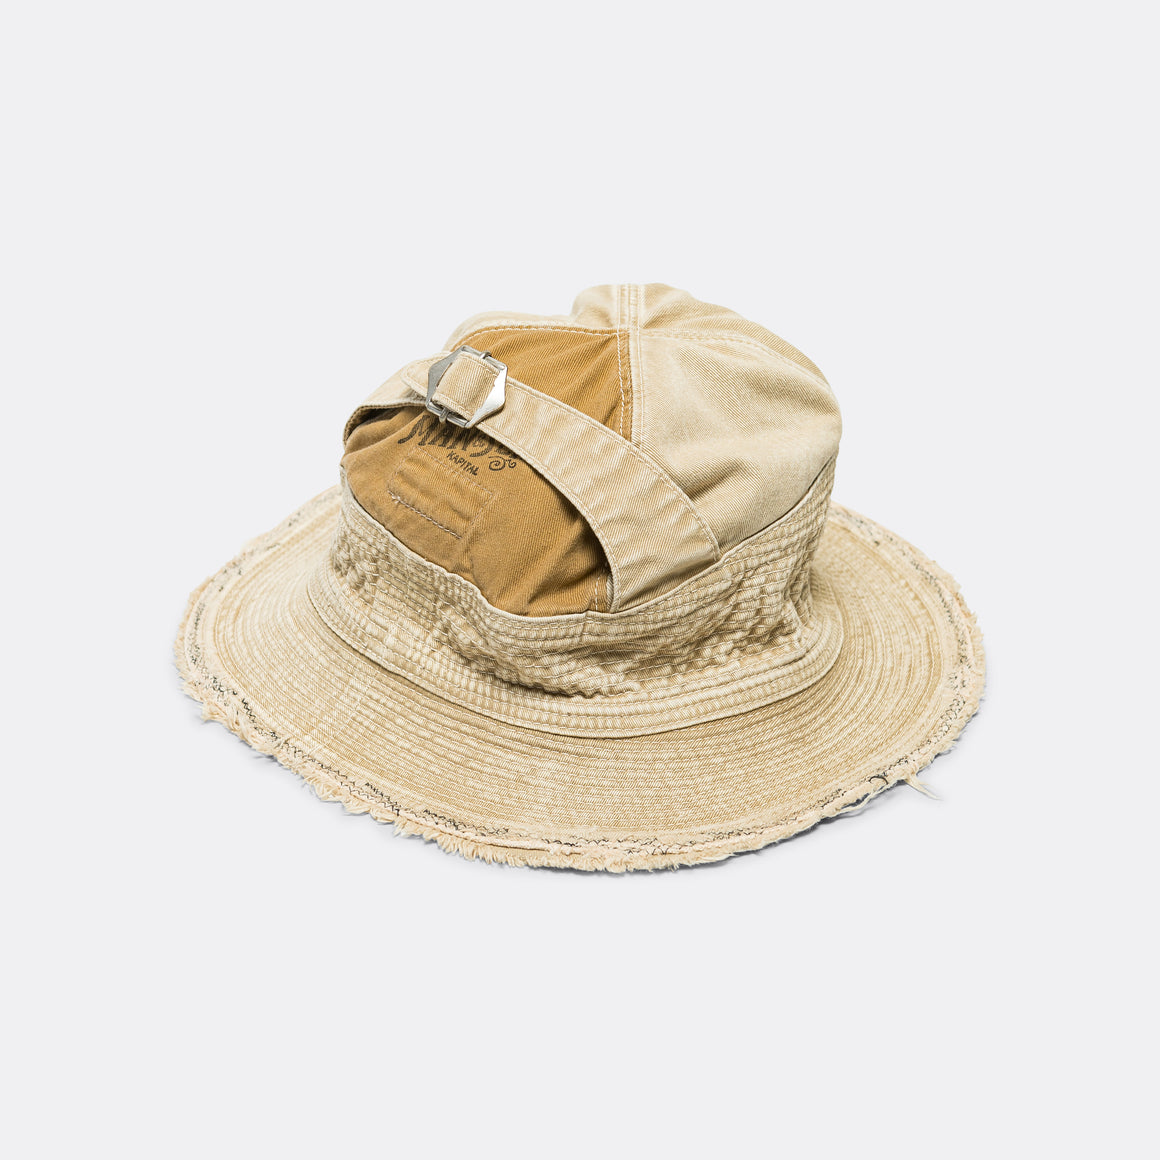 11.5oz THE OLD MAN AND THE SEA Hat (SOFT CRASH REMAKE) - Beige